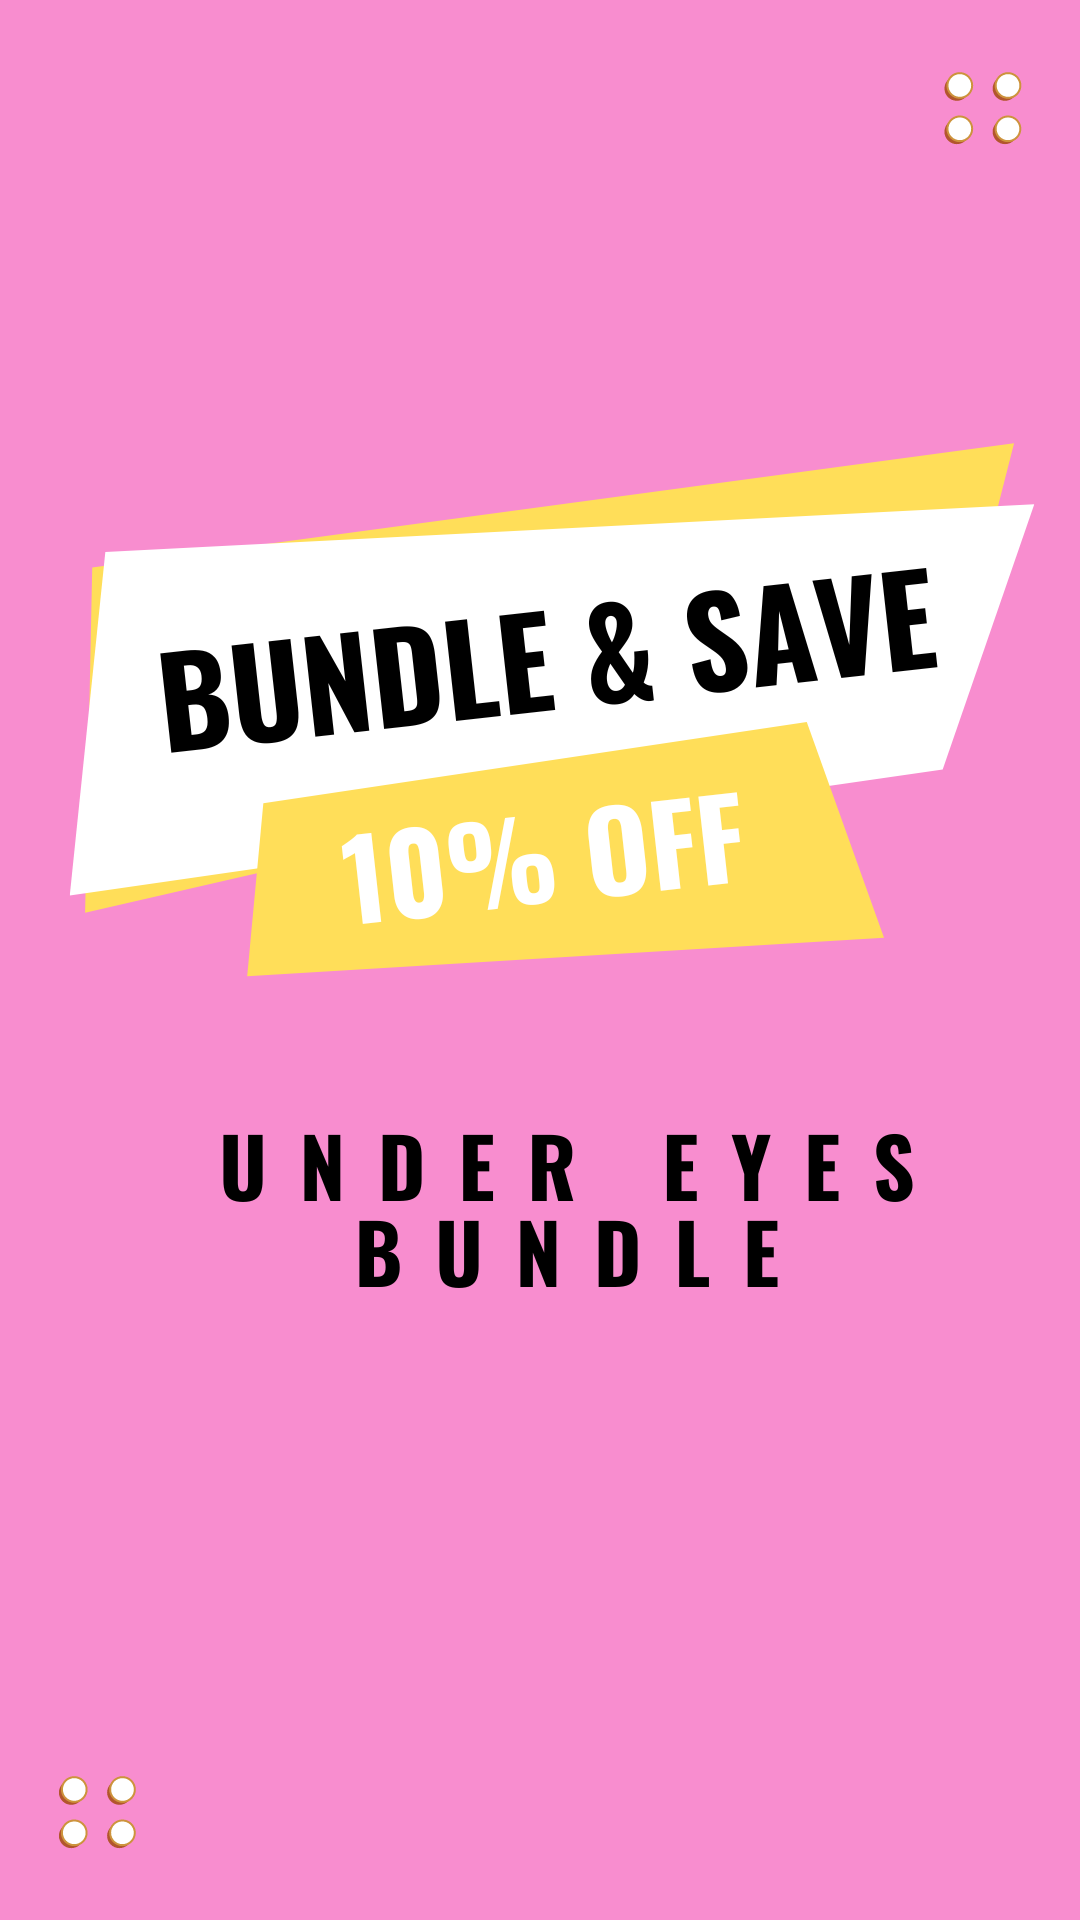 New Face & Eyes Bundle for Dark Circles Puffy Eyes Fine Lines